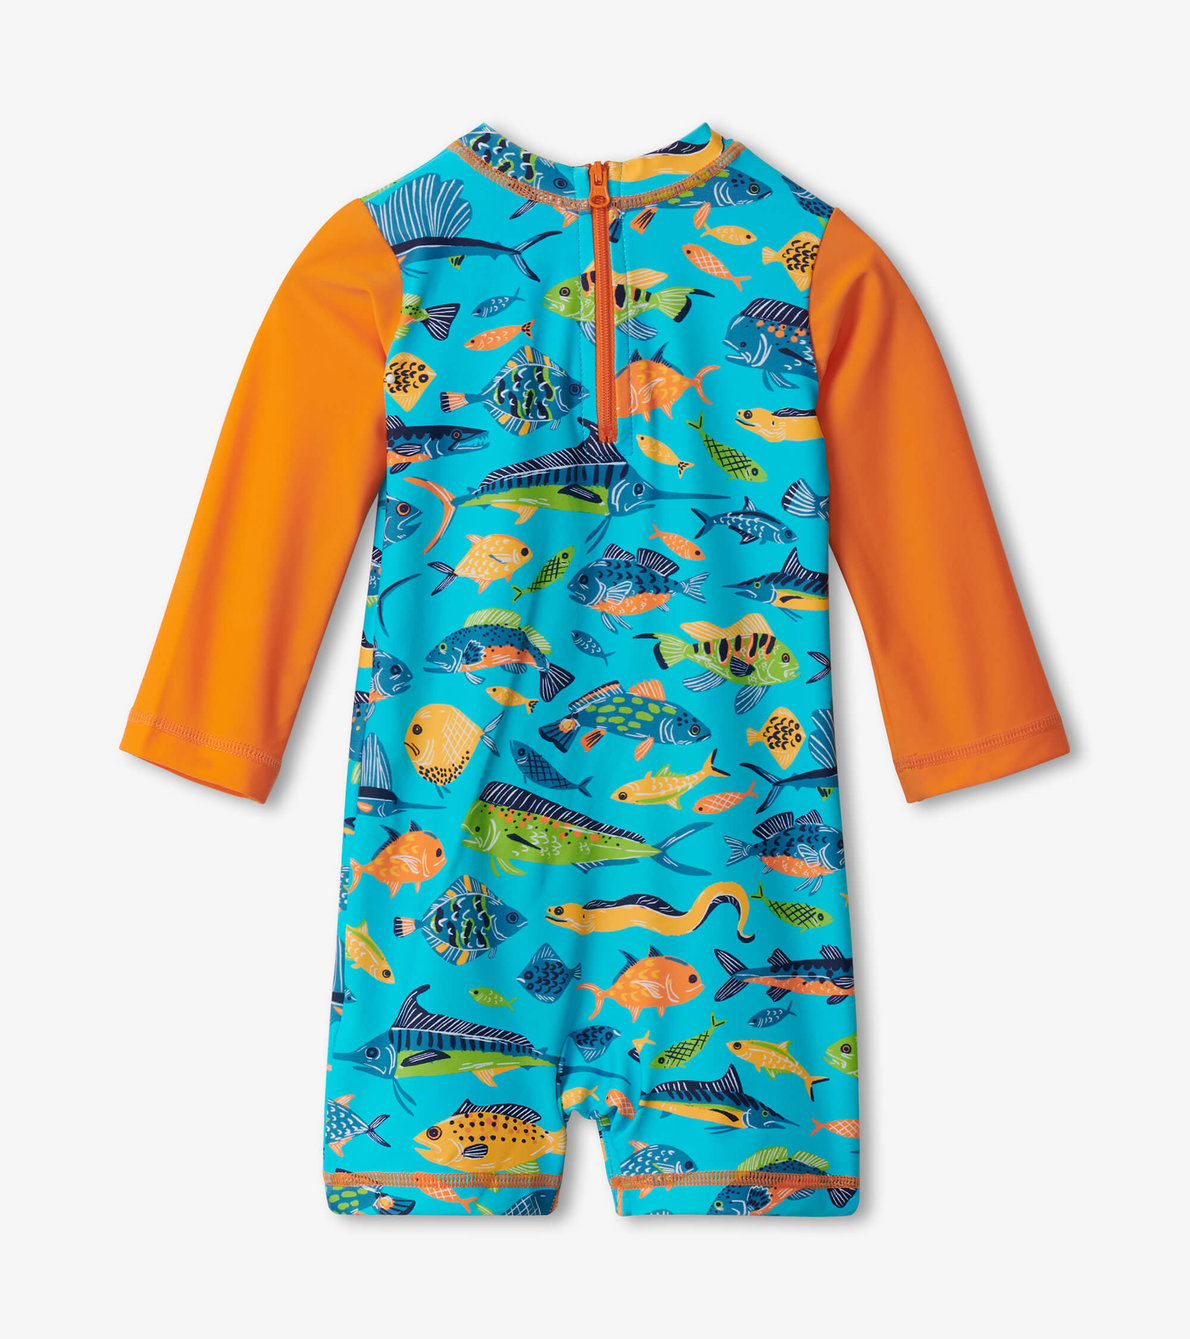 View larger image of Ocean Life Baby One-Piece Rashguard